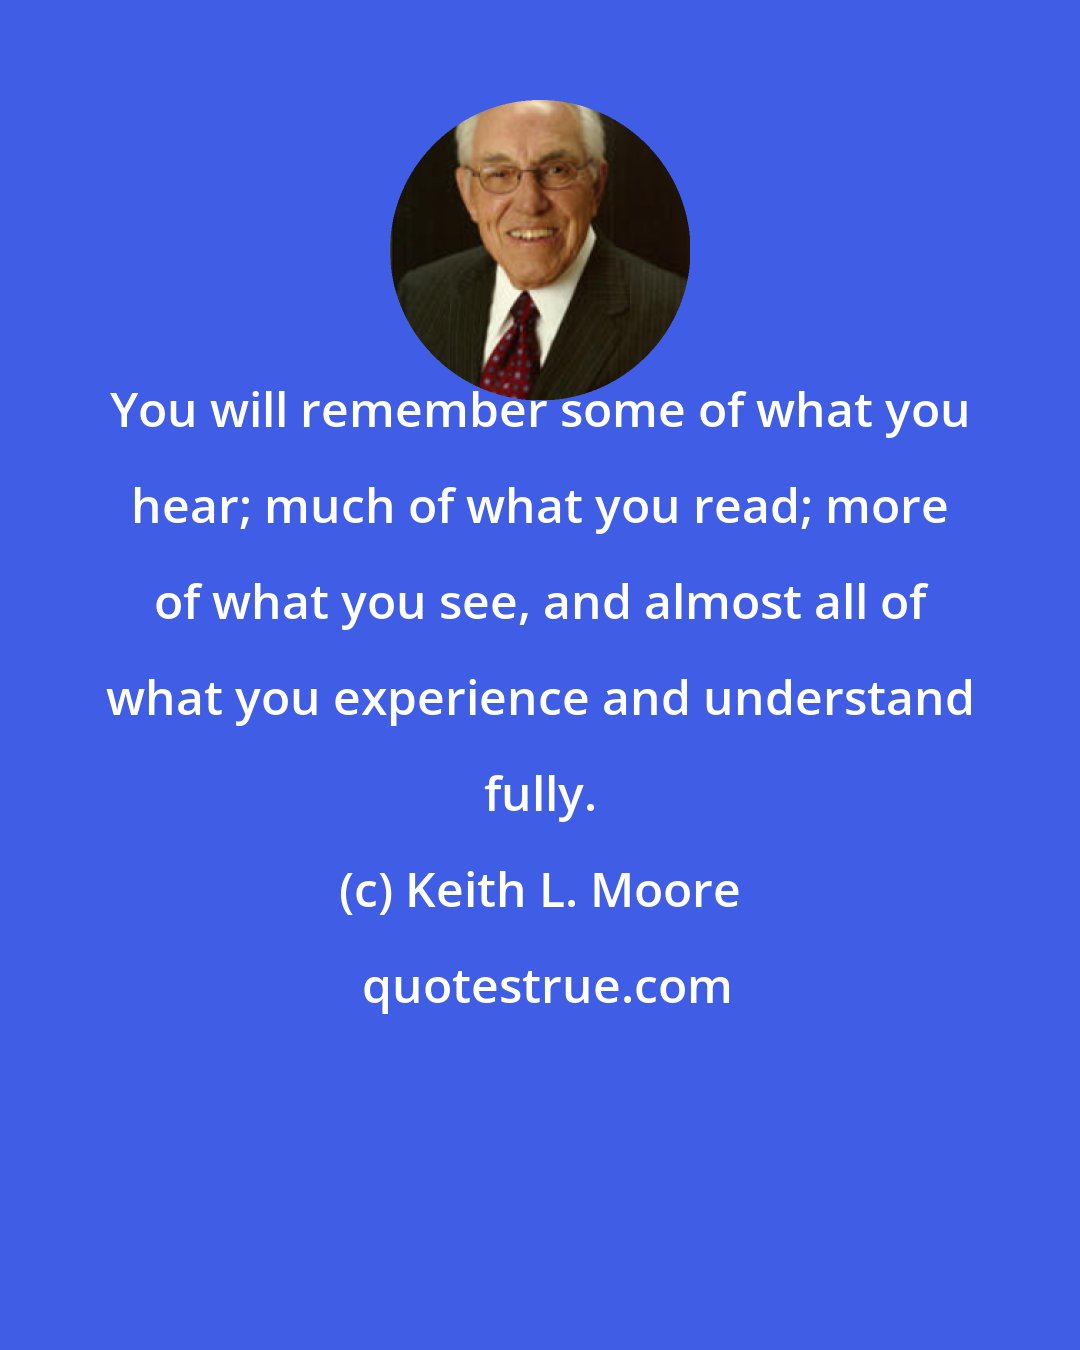 Keith L. Moore: You will remember some of what you hear; much of what you read; more of what you see, and almost all of what you experience and understand fully.